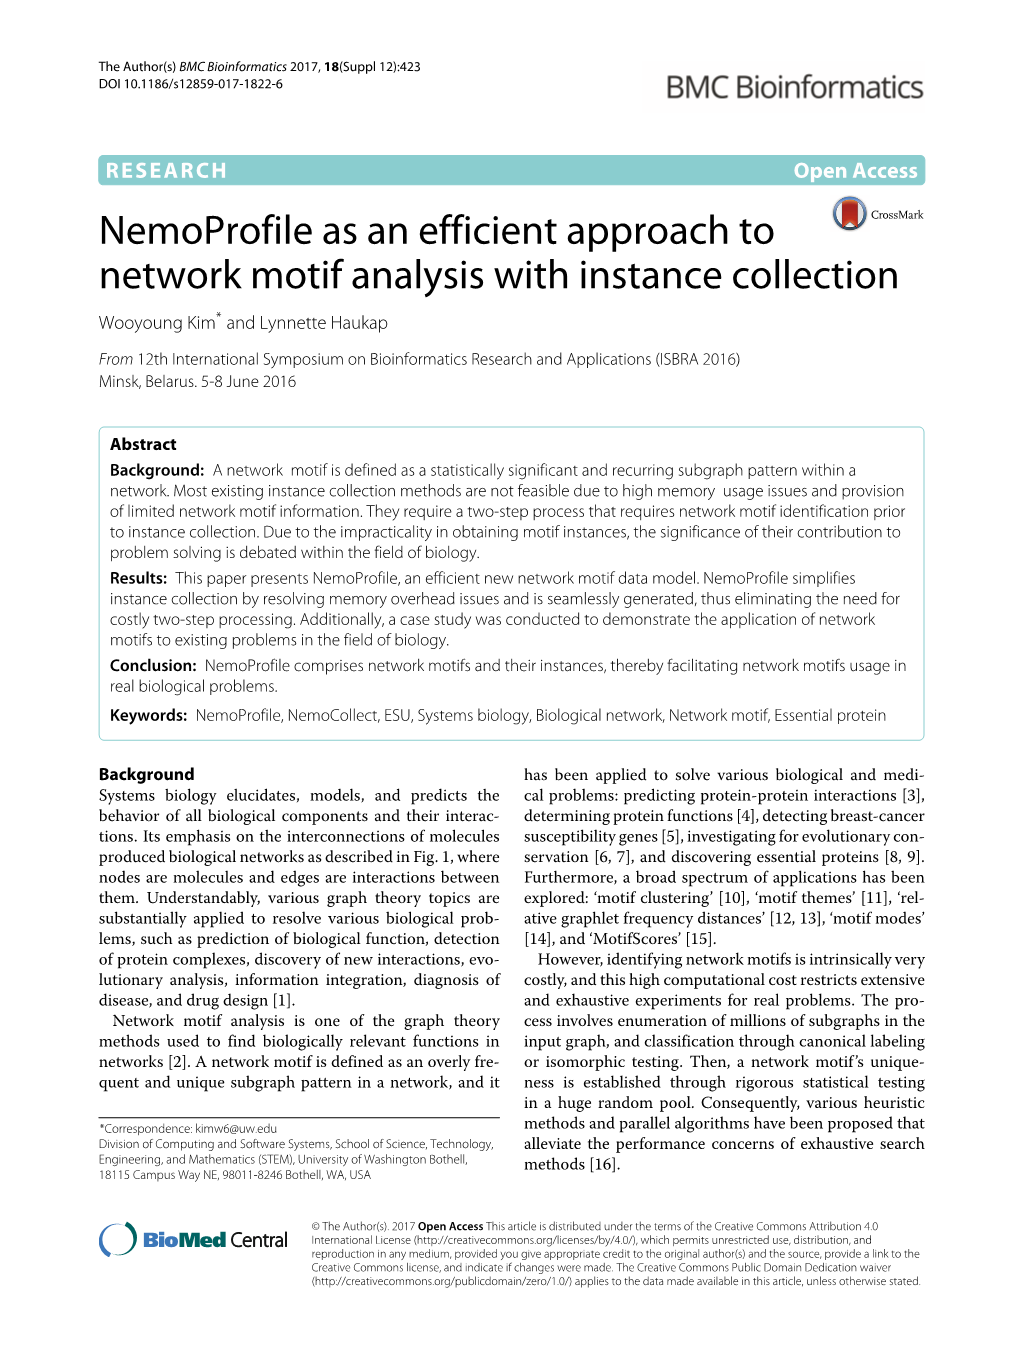 Nemoprofile As an Efficient Approach to Network Motif Analysis with Instance Collection Wooyoung Kim* and Lynnette Haukap